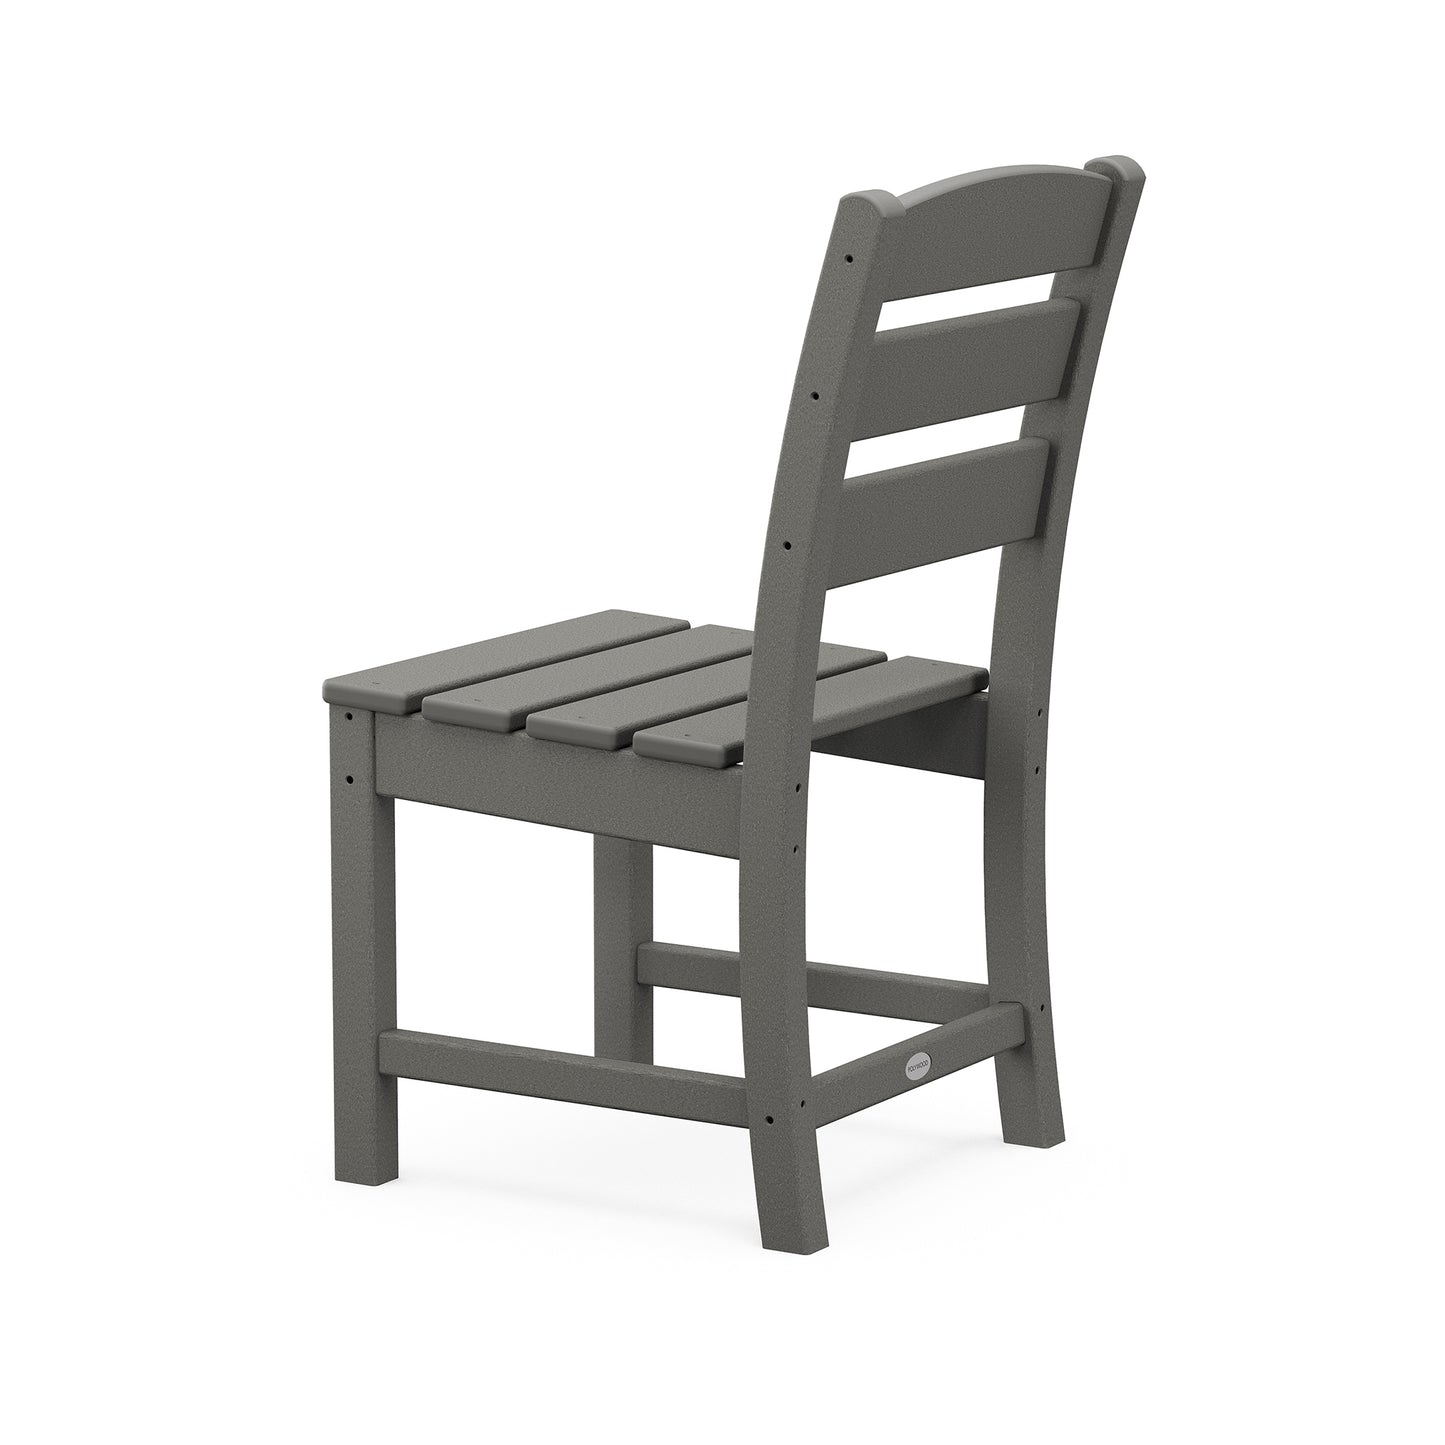 A gray, modern-style POLYWOOD® Lakeside Dining Side Chair featuring a slatted back and seat, shown against a plain white background.